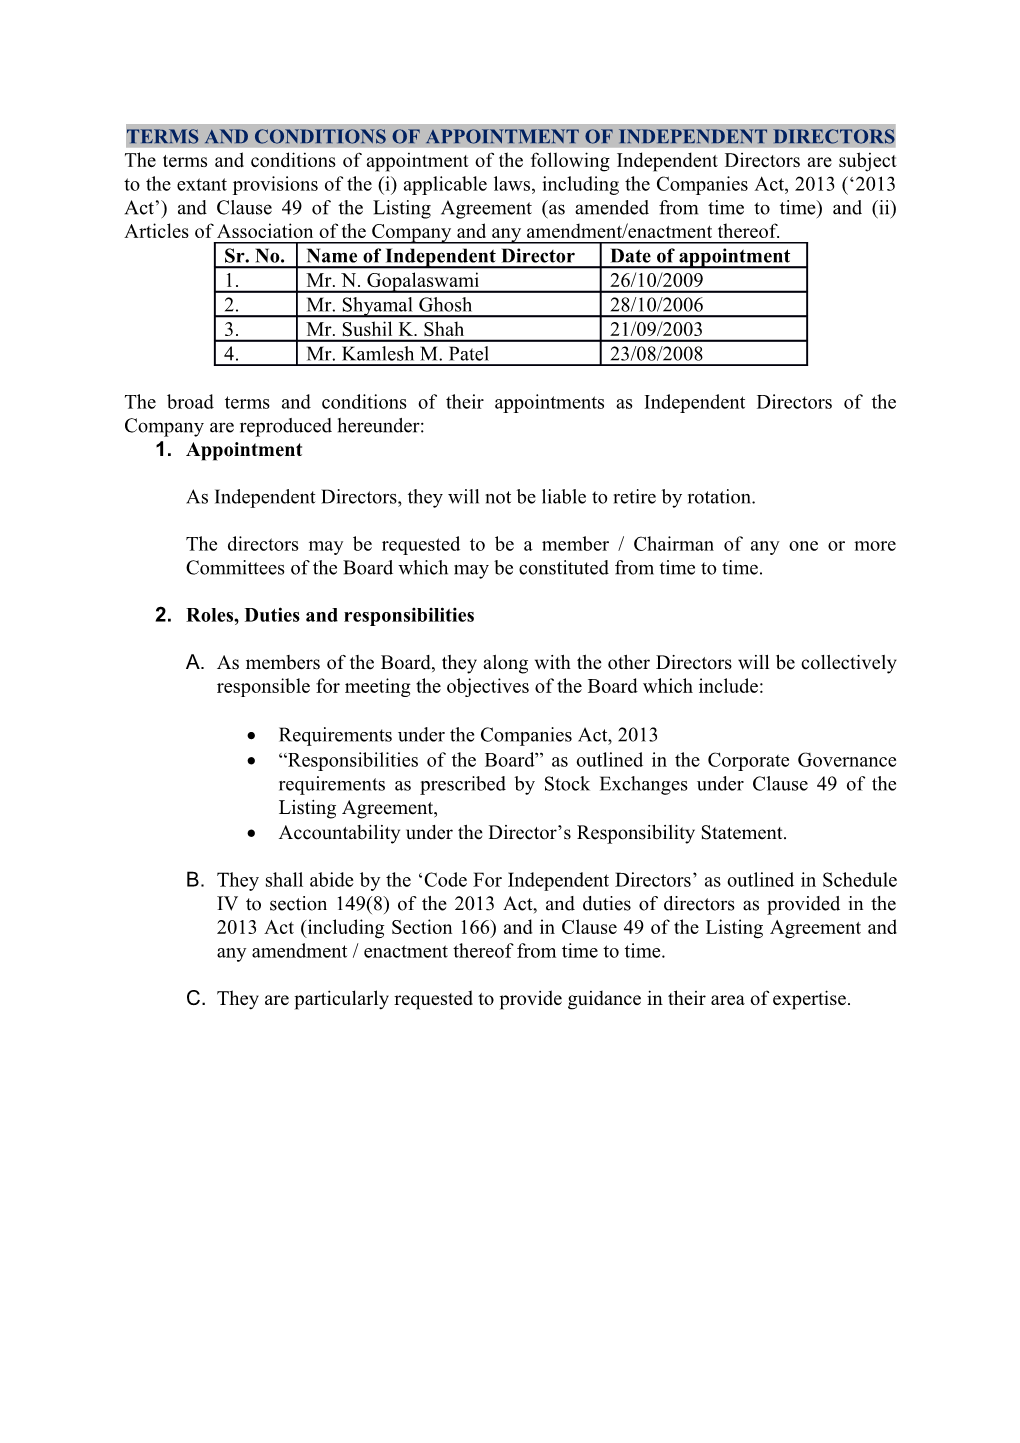 Terms and Conditions of Appointment of Independent Directors